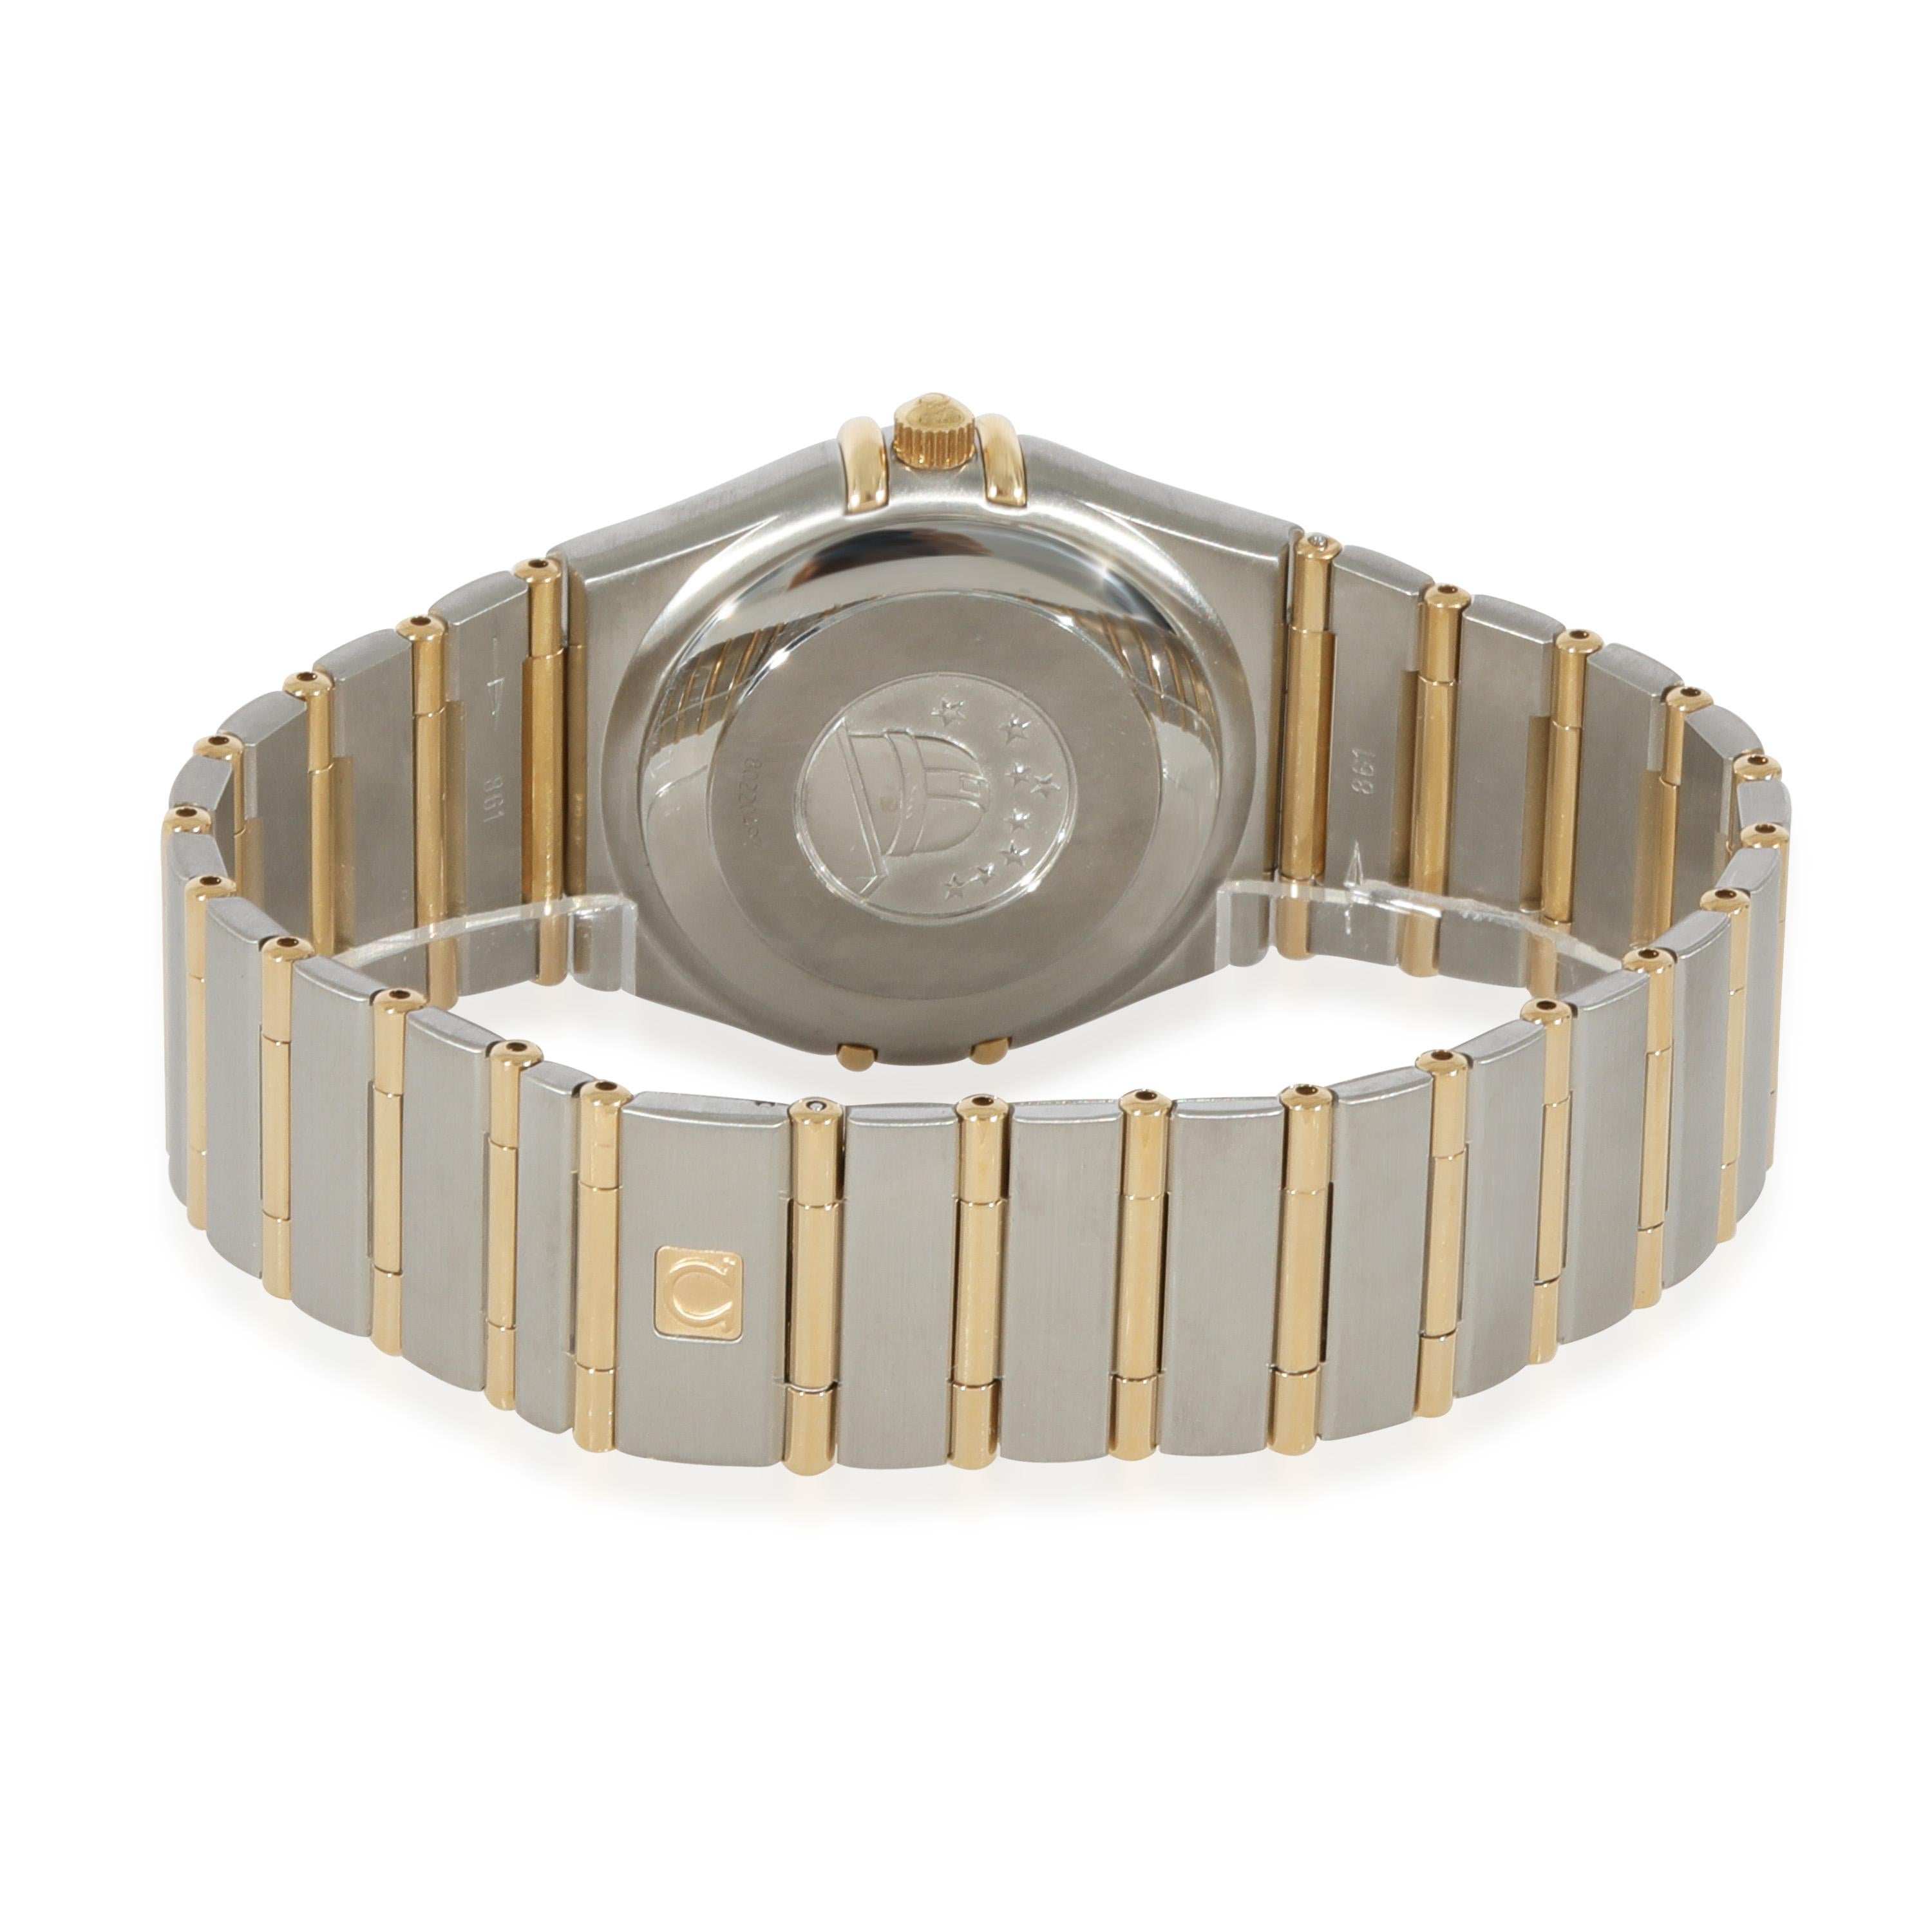 Omega Constellation 1202.10.00 Men's Watch in 18kt Stainless Steel/Yellow Gold

SKU: 125864

PRIMARY DETAILS
Brand: Omega
Model: Constellation
Country of Origin: Switzerland
Movement Type: Mechanical: Automatic/Kinetic
Year of Manufacture: